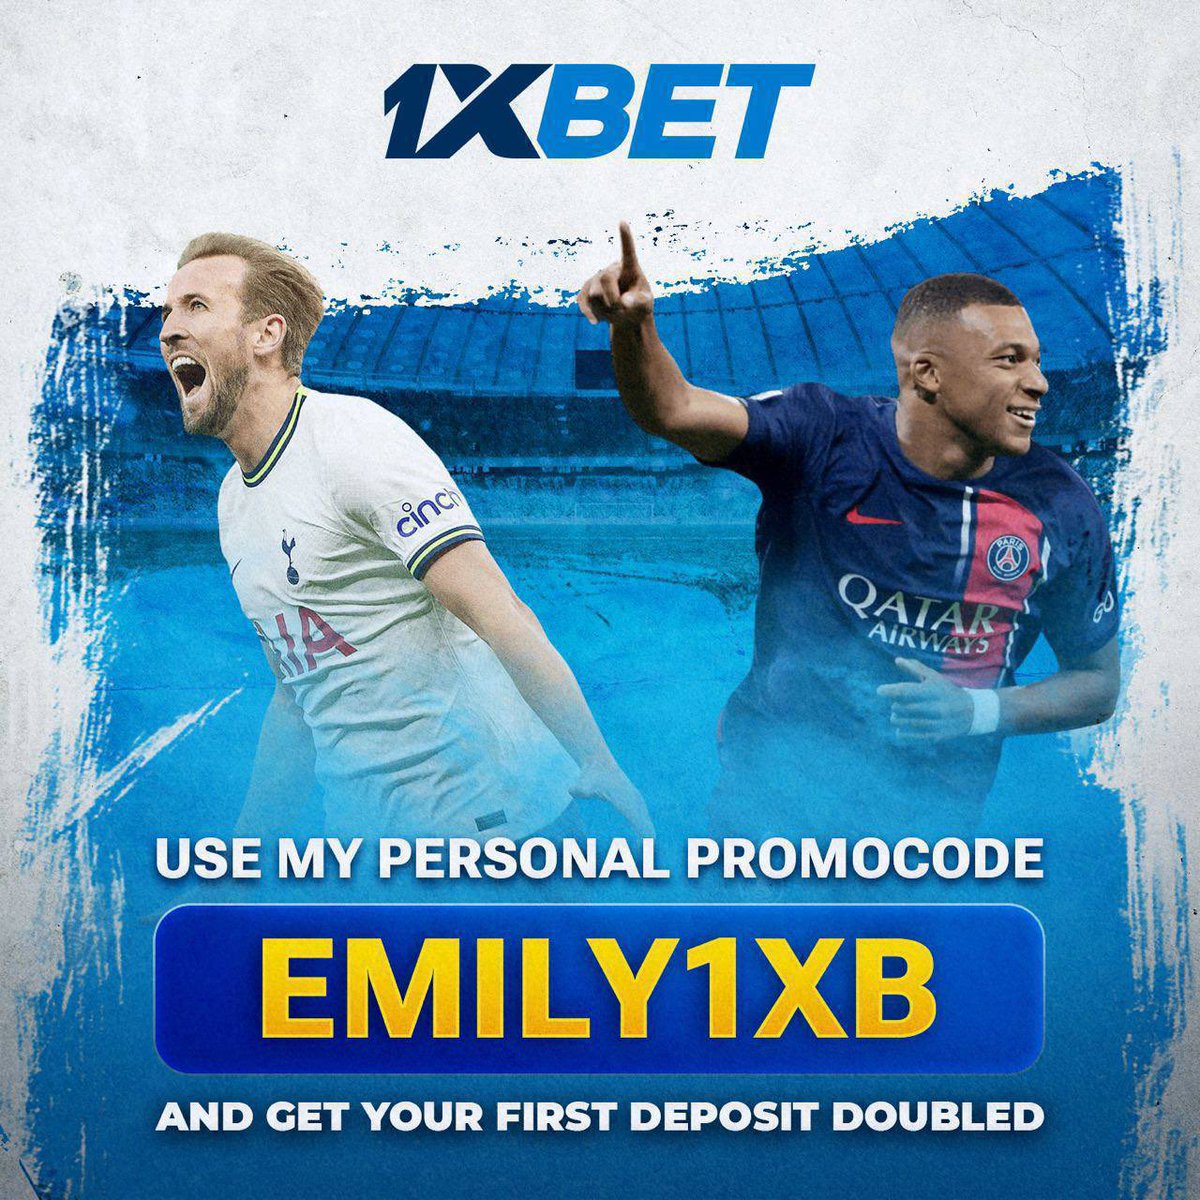 BET OF THE DAY ON 1XBET🌍 5 ODDS 👉 NAK62 2 ODDS 👉 ERN62…CEP62 Register Here 👇👇👇 tinyurl.com/y2ep8bya tinyurl.com/y2ep8bya ✅Use promo code EMILY1XB to get ur welcome bonus up to $300 JOIN US HERE - t.me/+sEBMzjQGpXRiO…